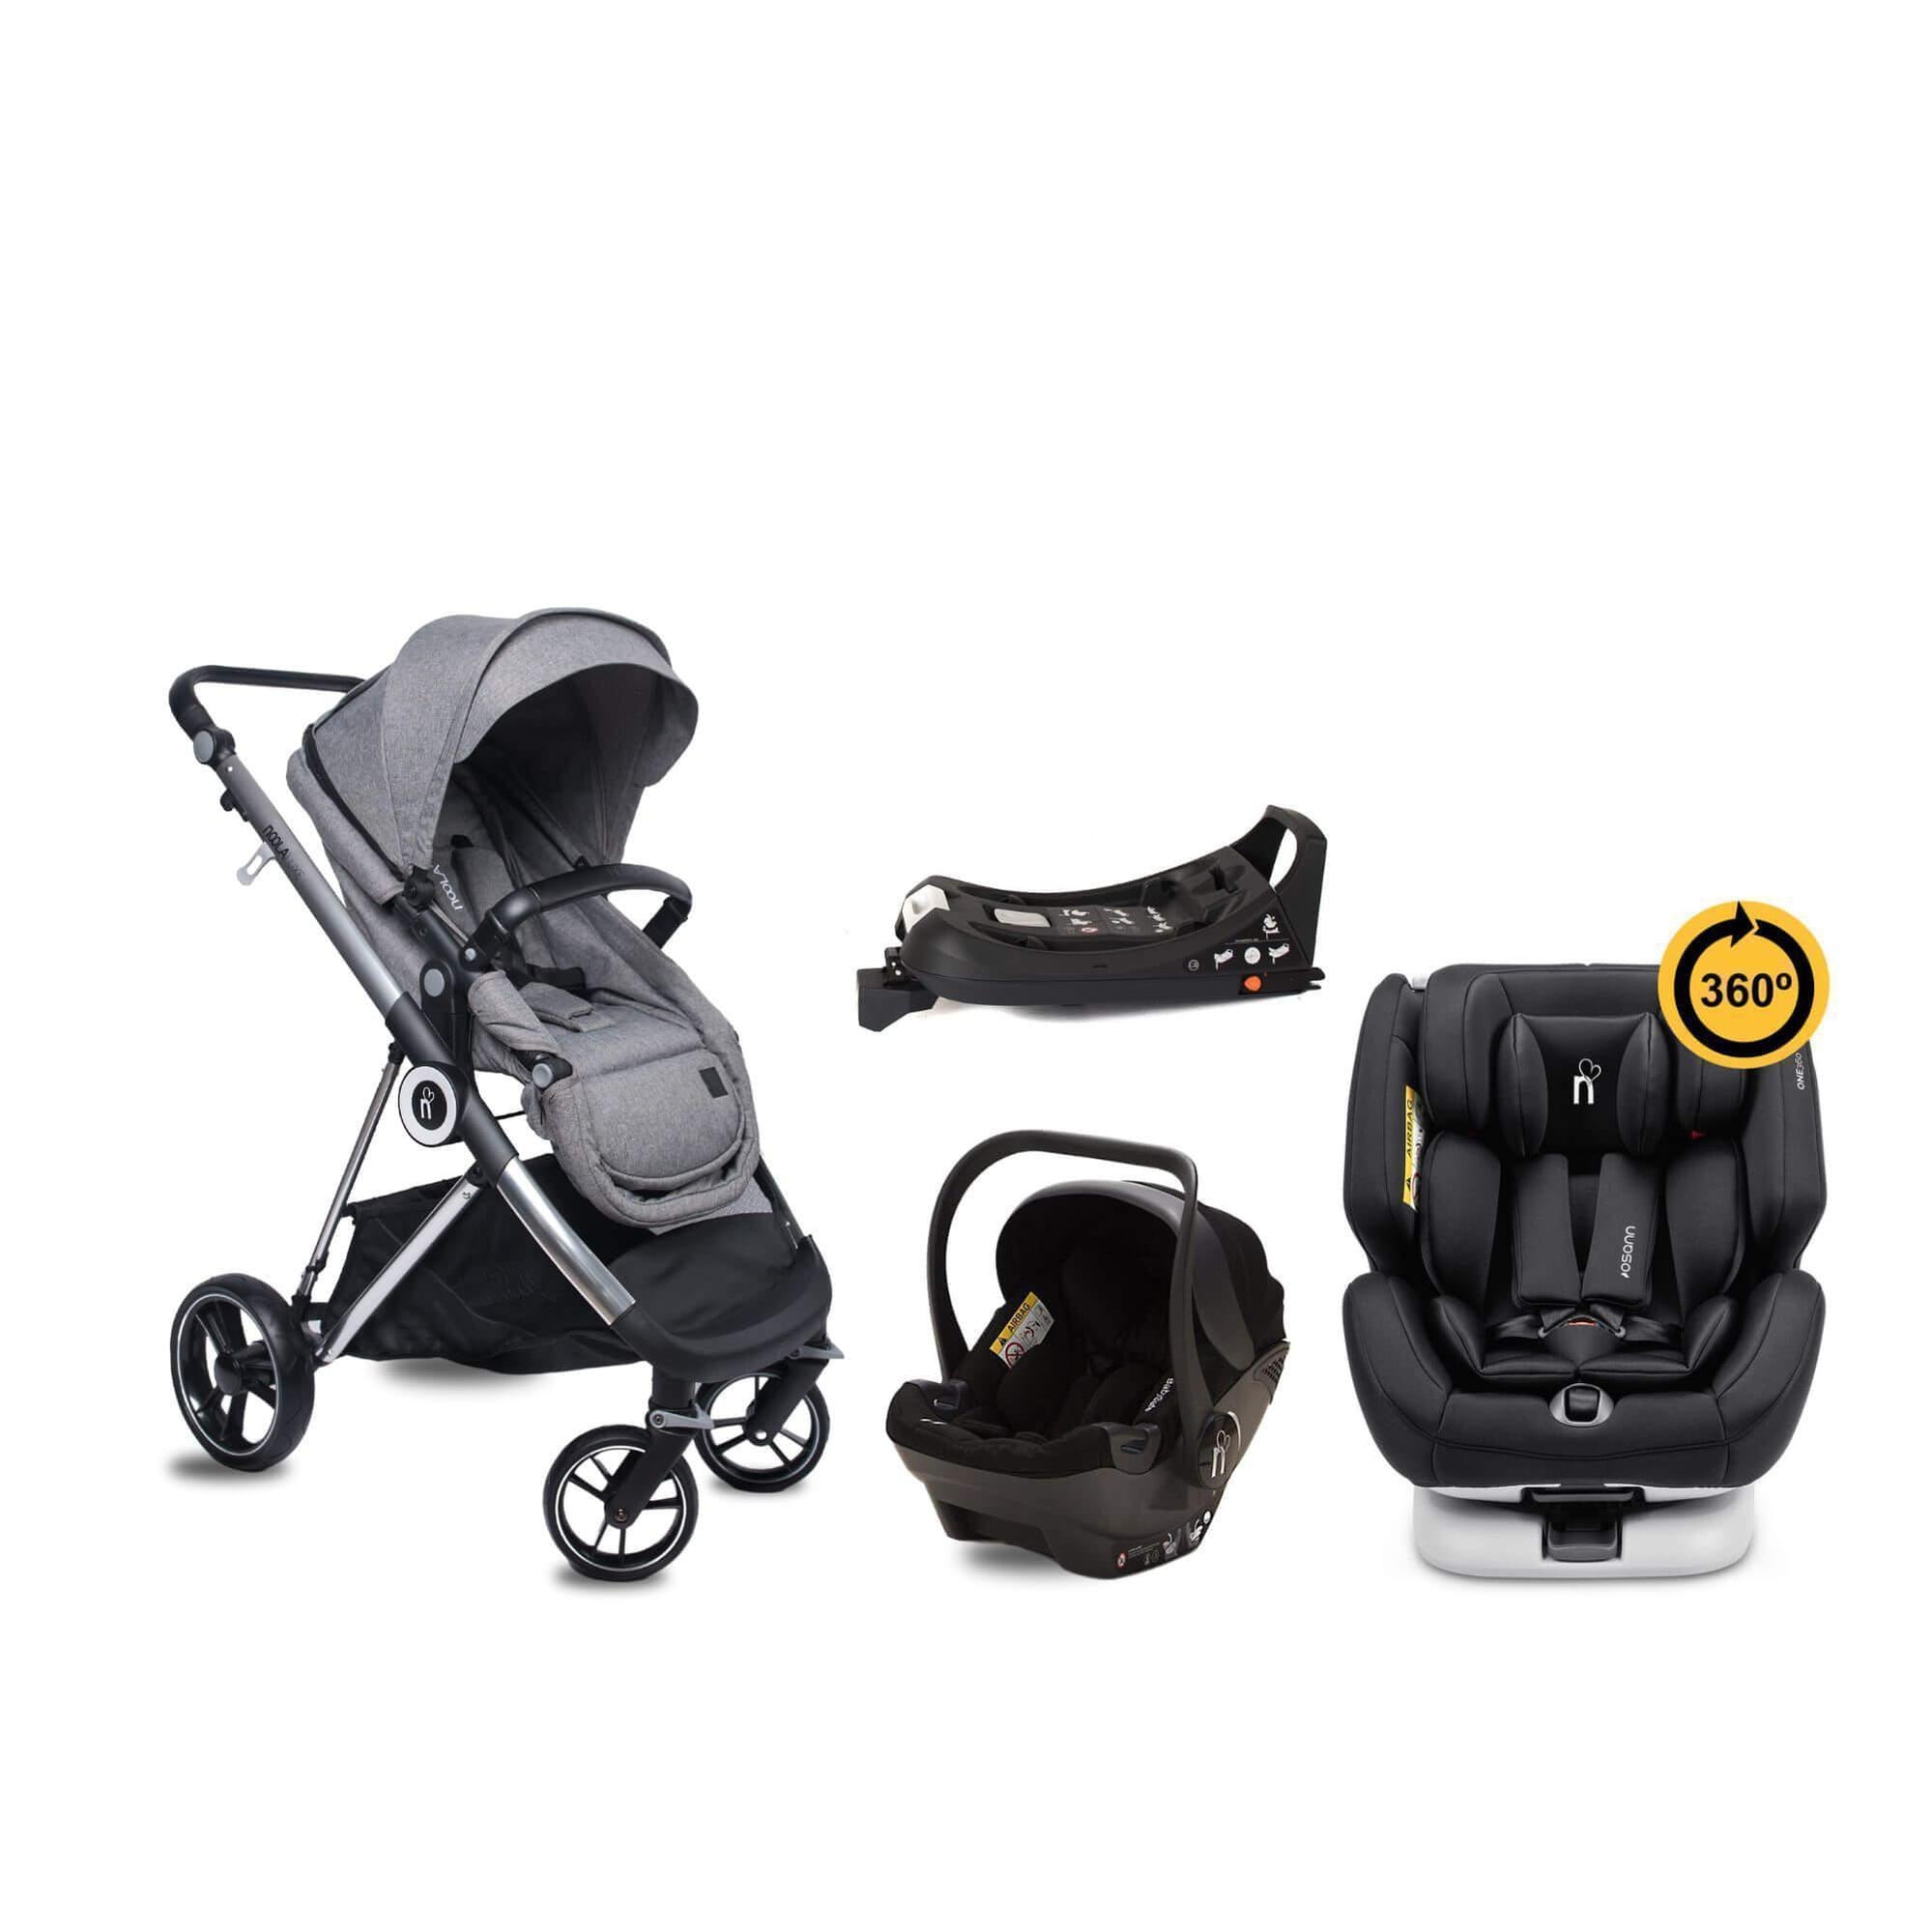 noola luxe 5in1 baby stroller lunar grey #SELECT THE COLOUR OF YOUR ONE360_ONE360 | MIDNIGHT BLACK